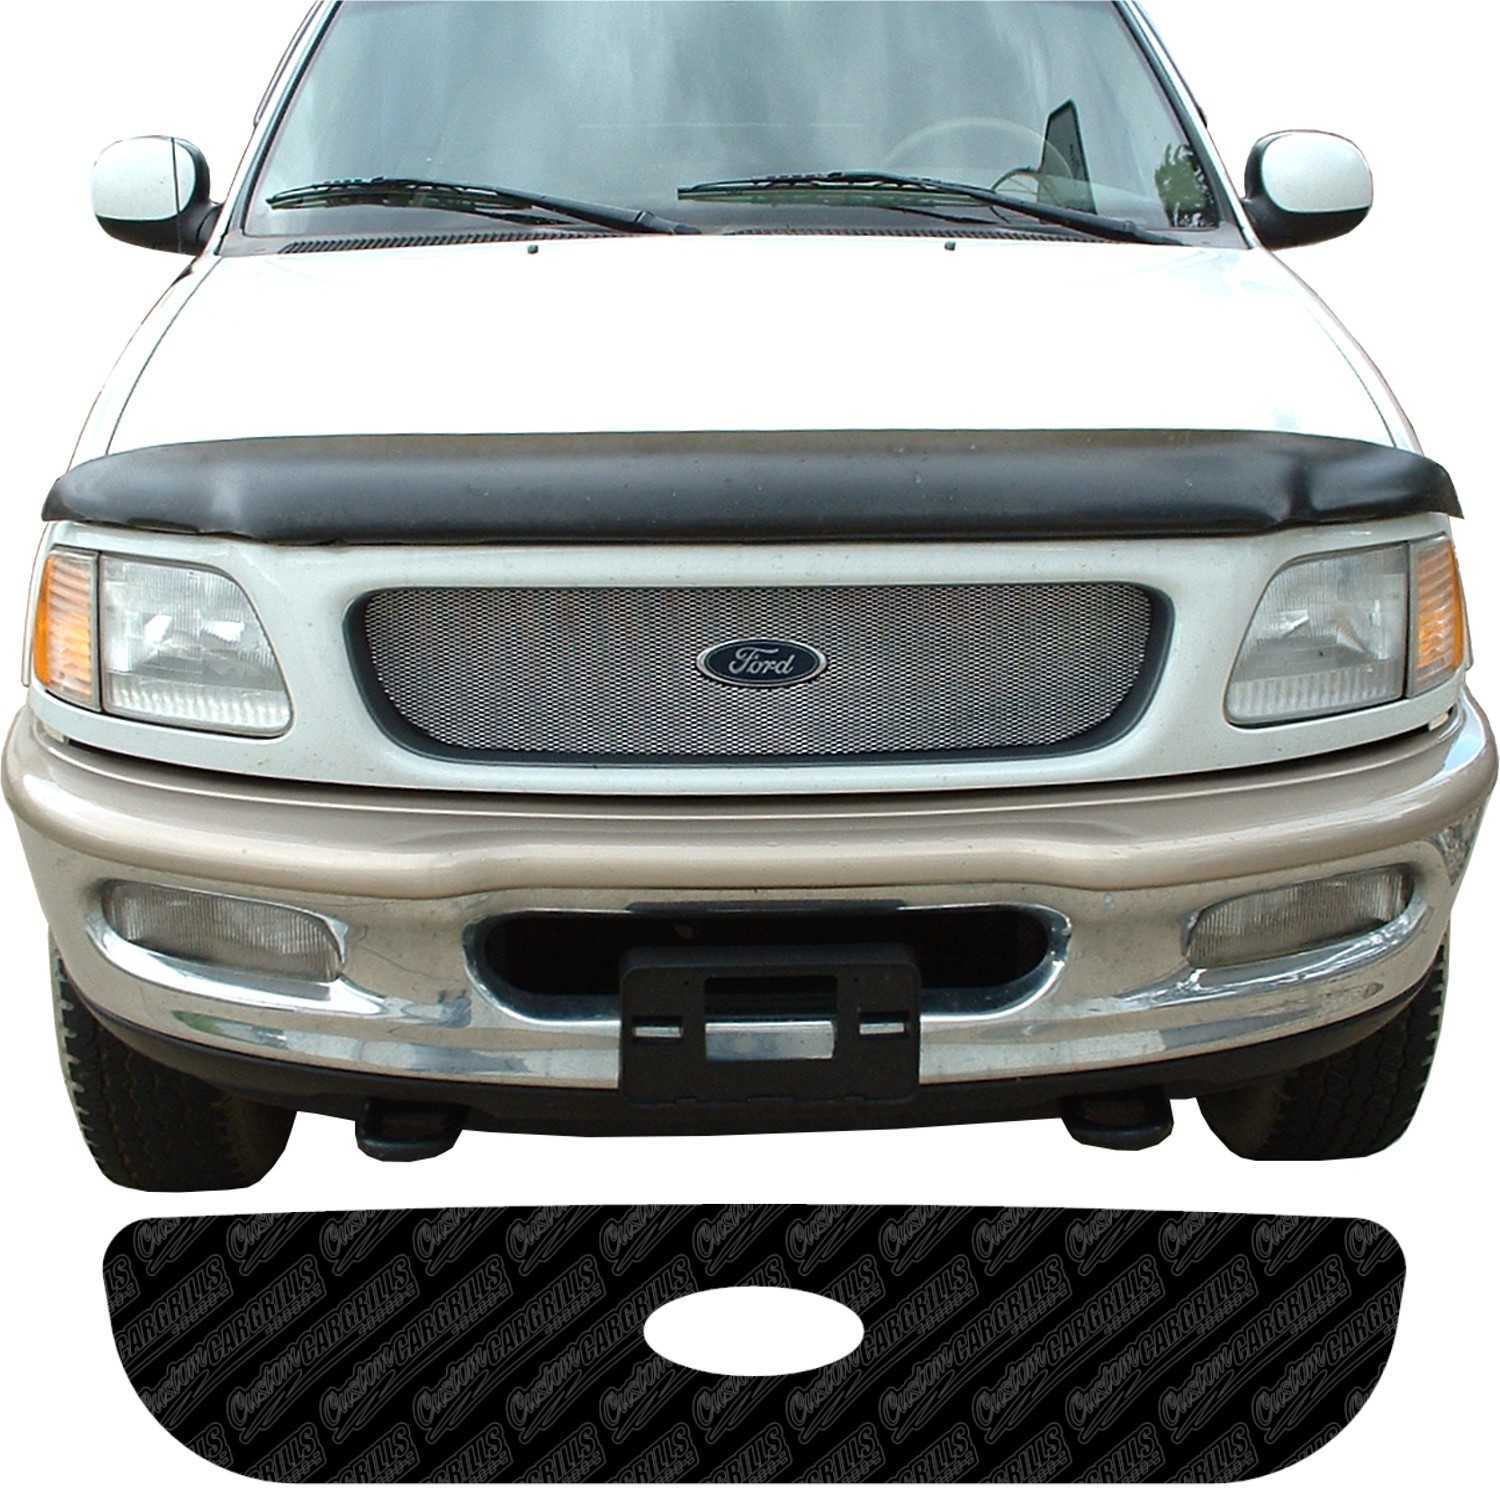 1997 - 1998 Ford F-150 Mesh Grill Template